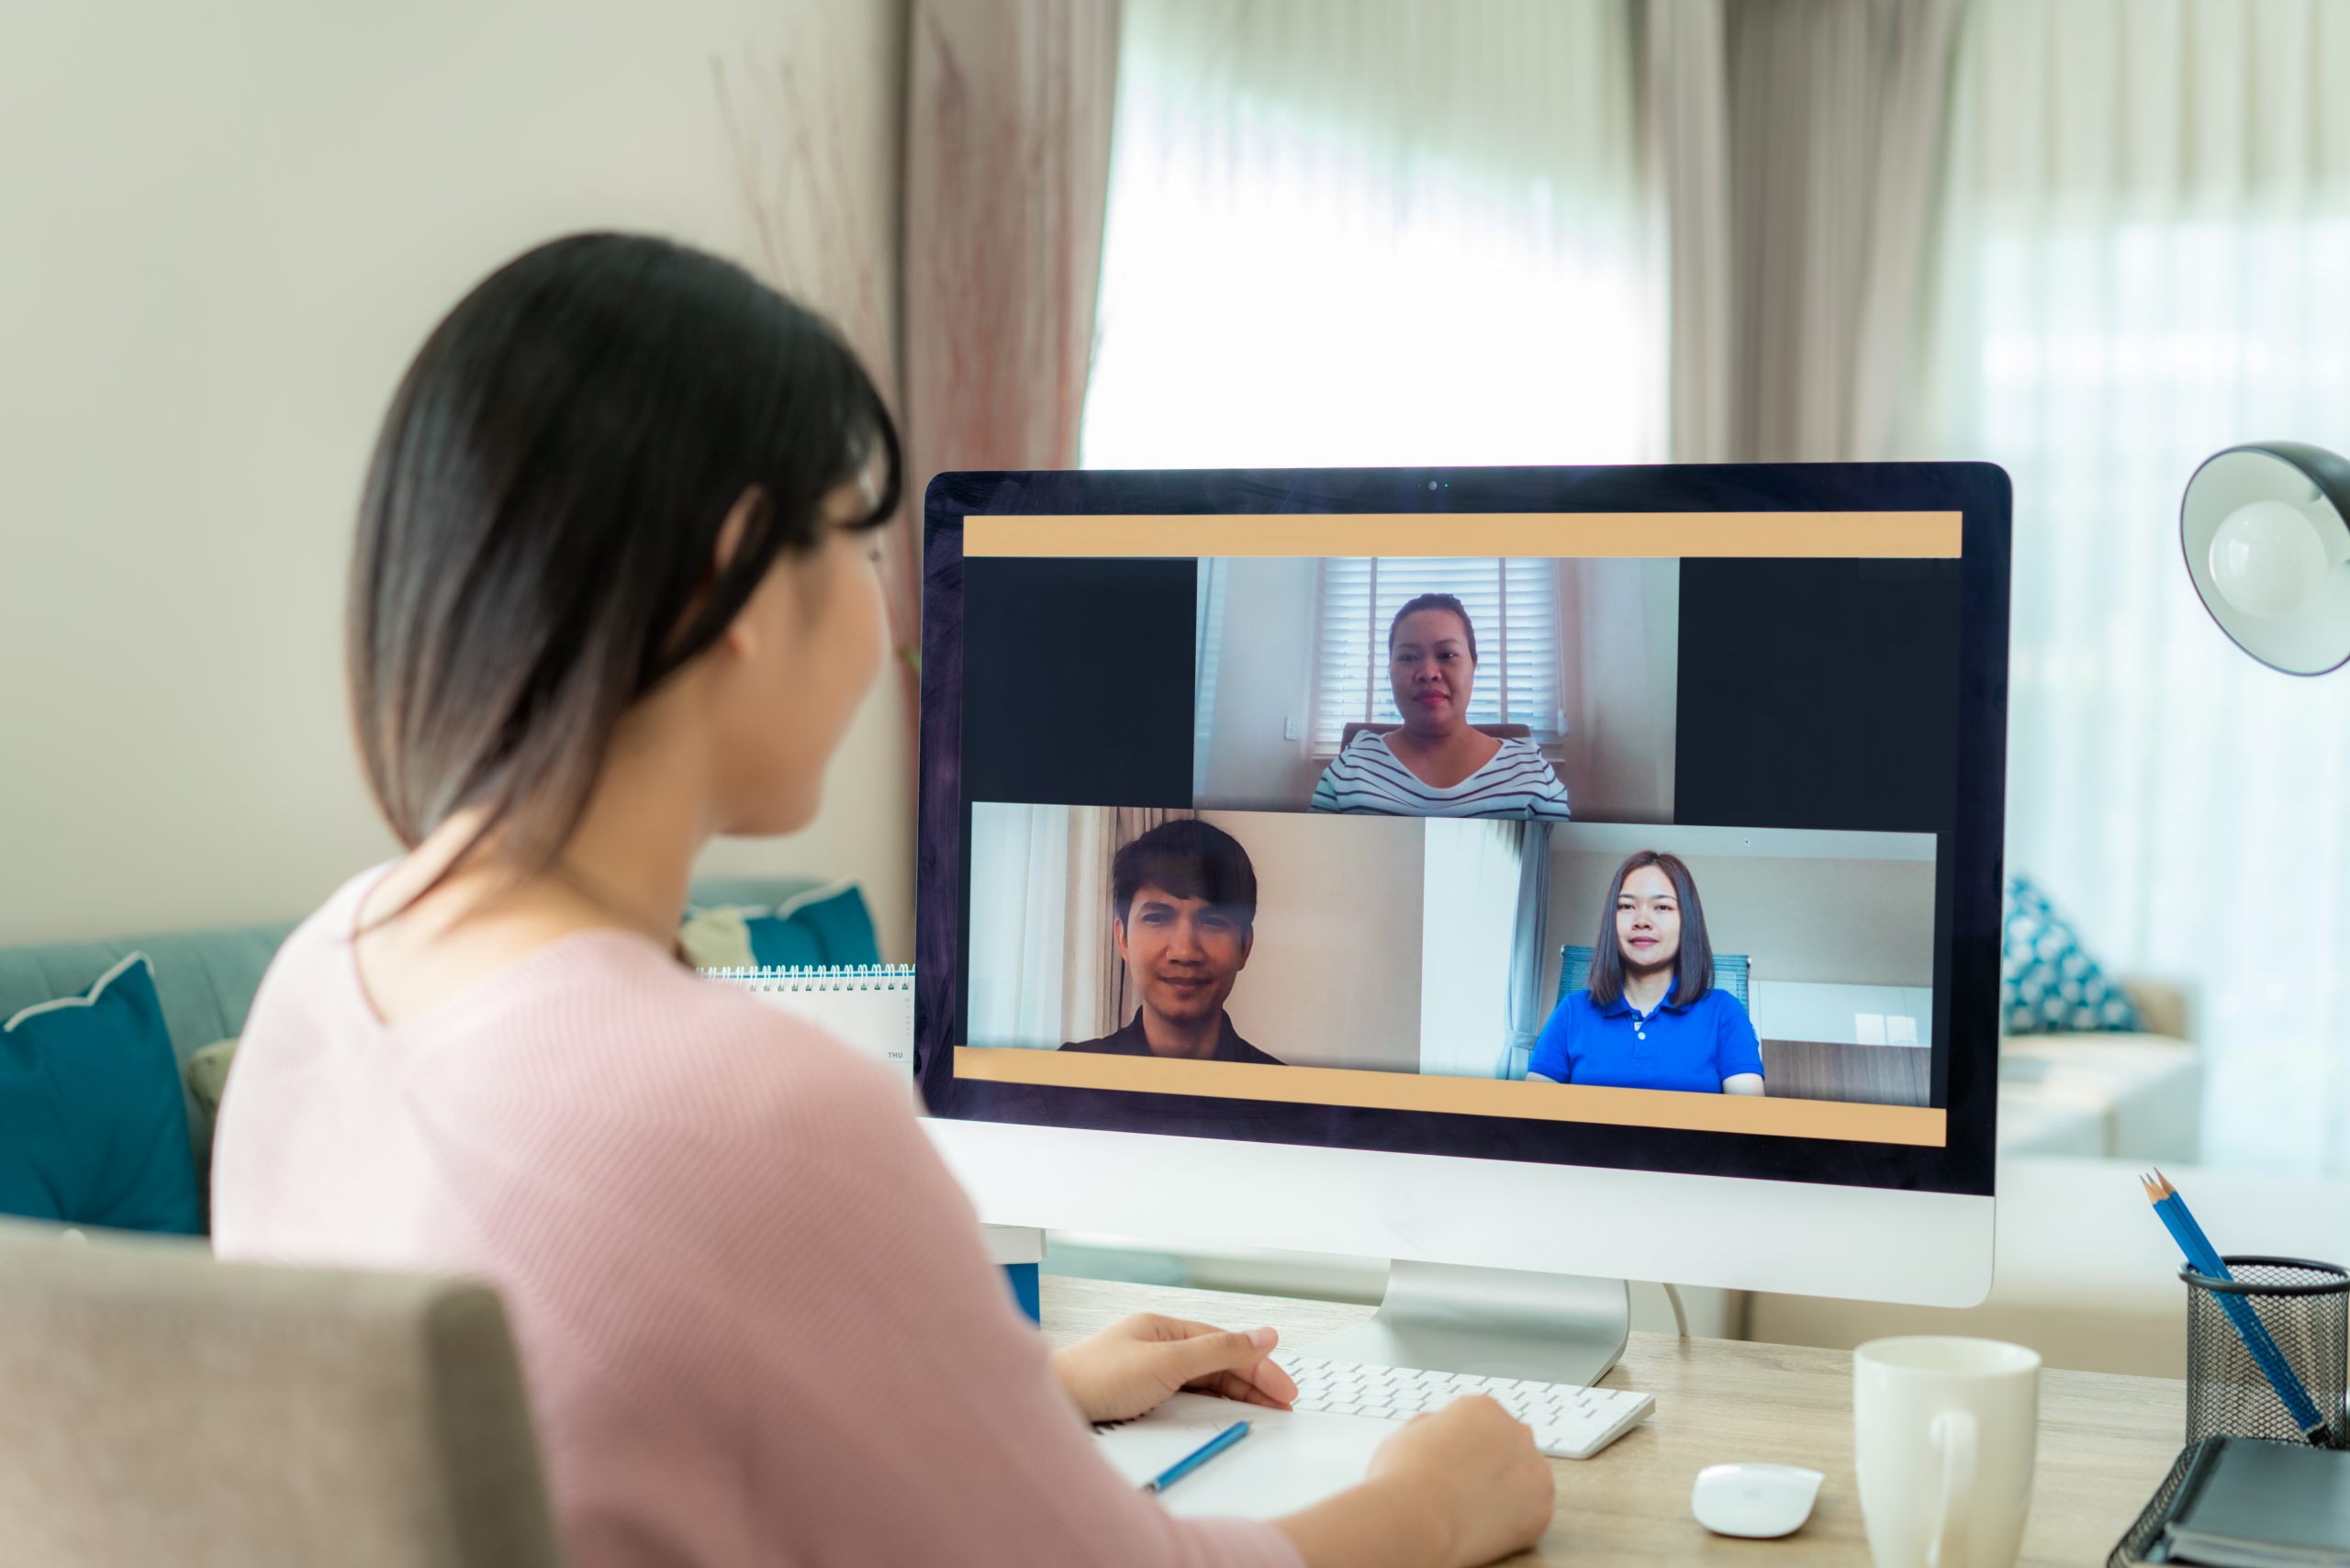 Are You Looking For The Best GoToMeeting Alternative? Here Are 10